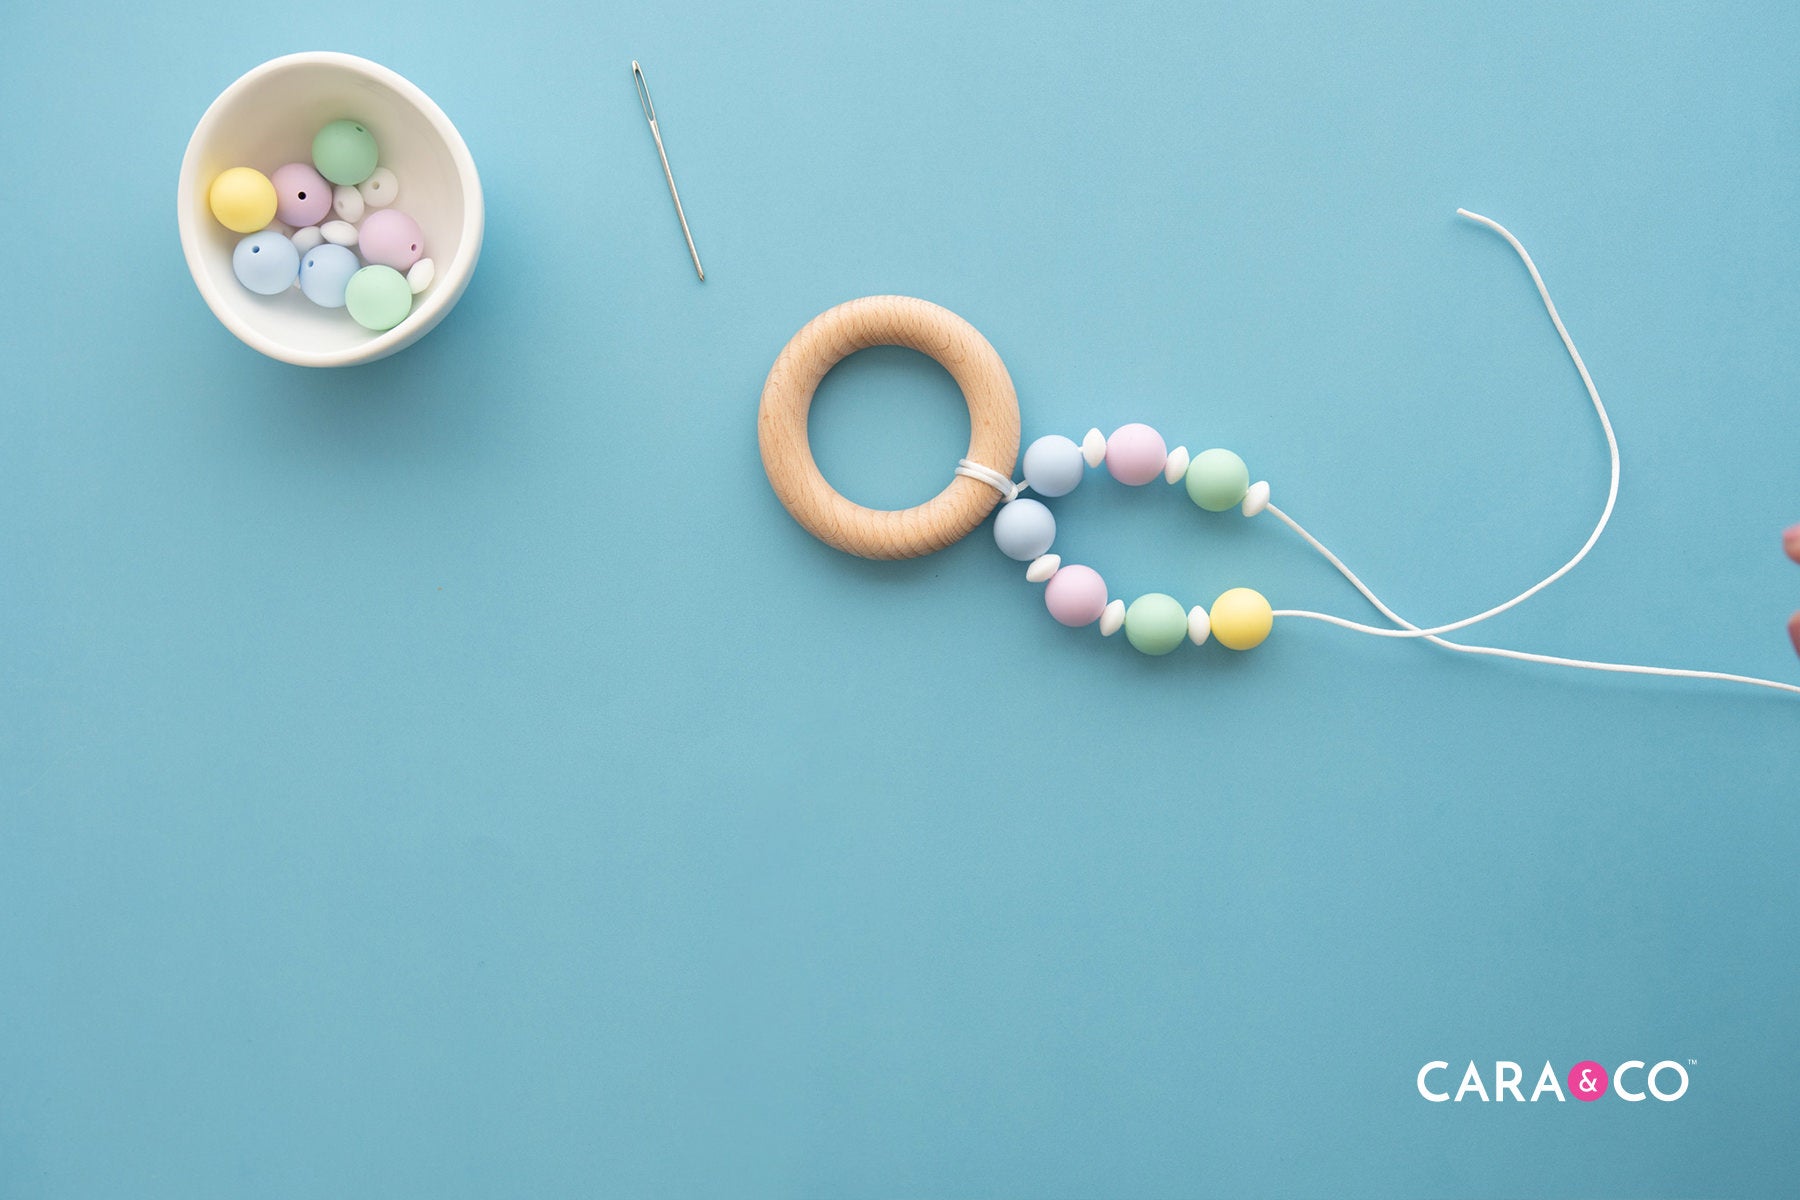 Silicone Bunny Ear Teether Step-by-Step - Cara & Co